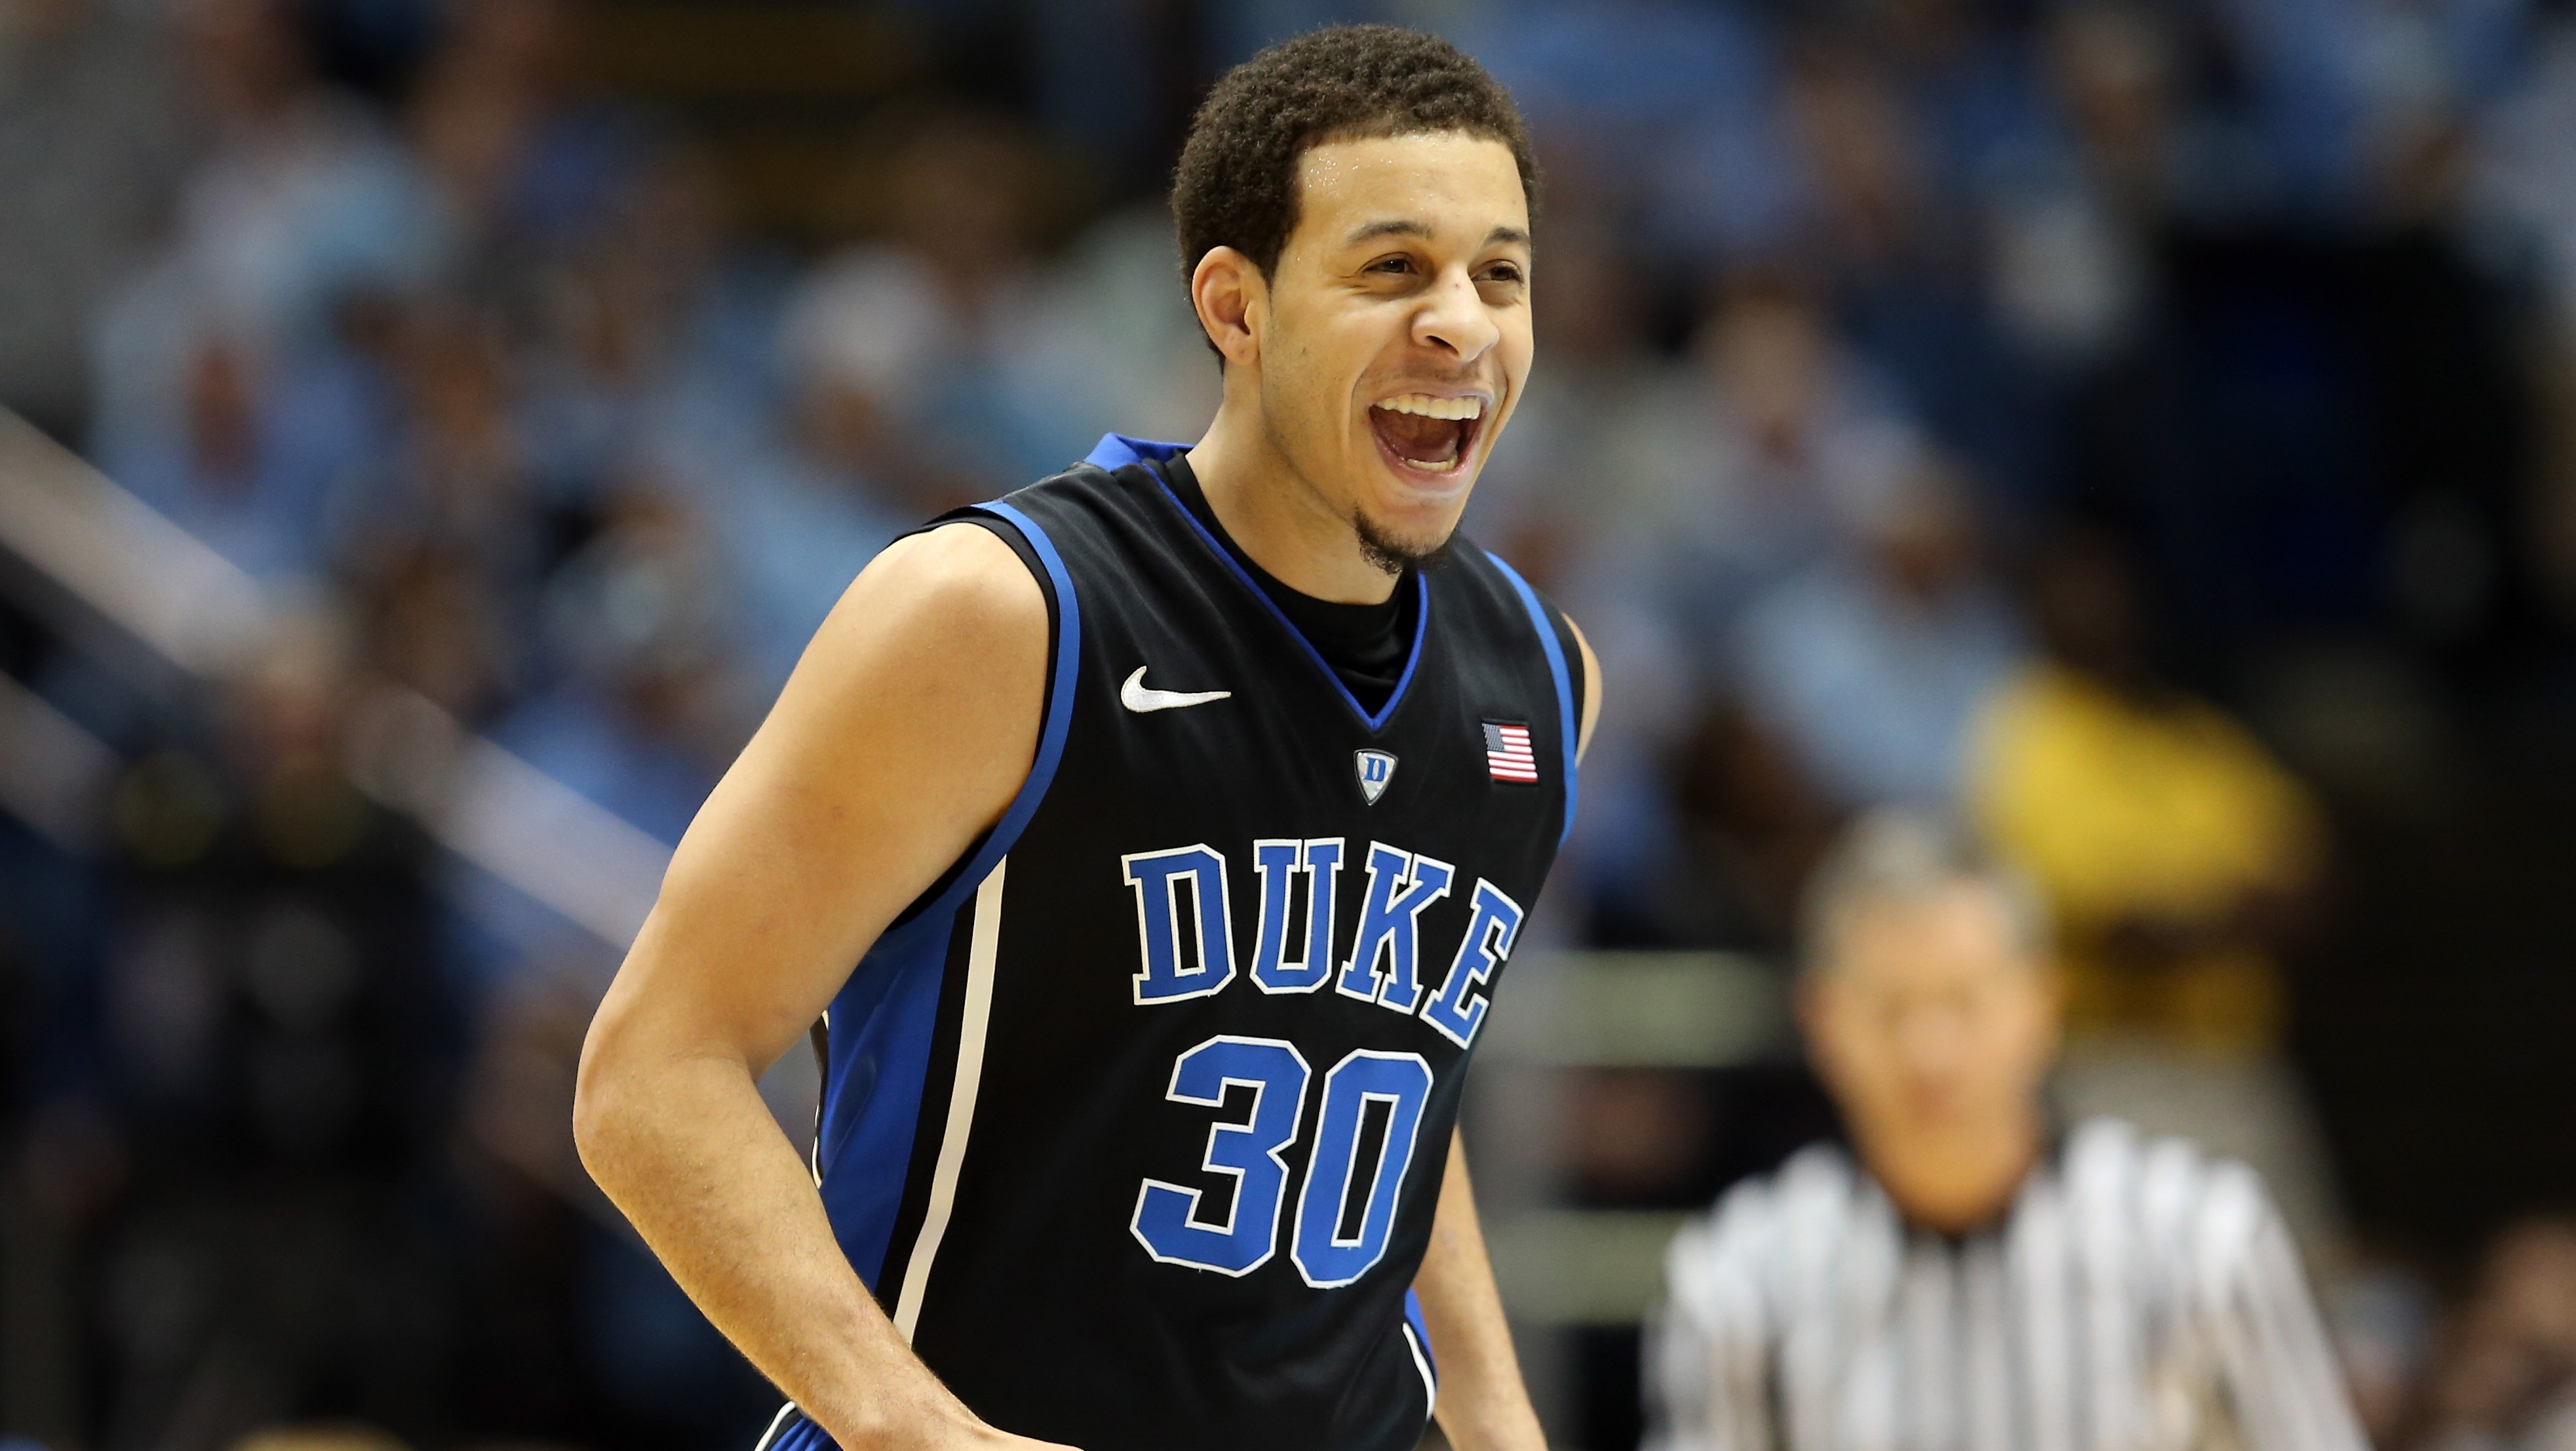 Seth Curry, steph curry brother